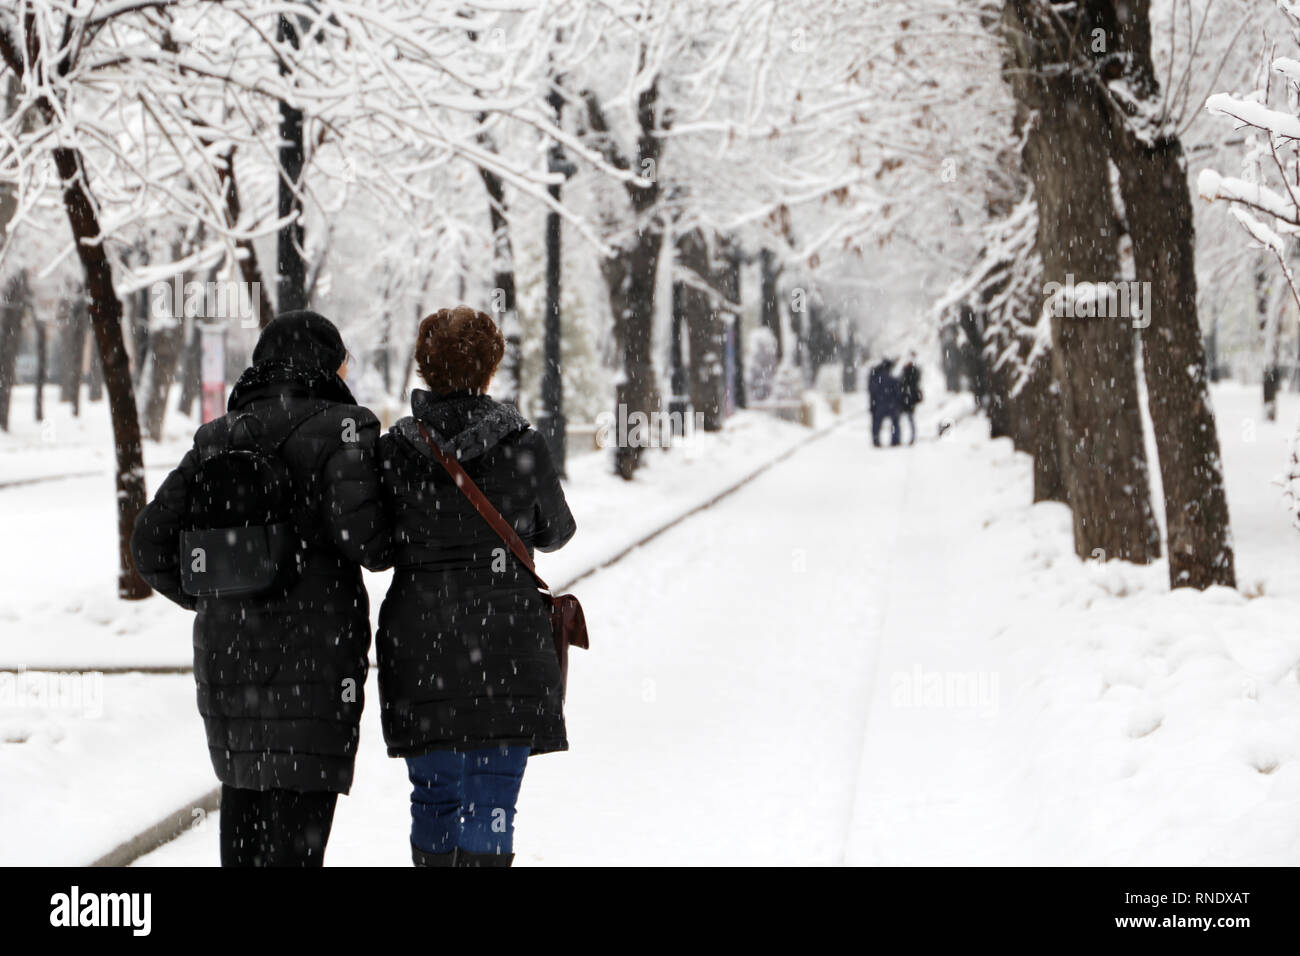 Snowy weather, people during a snowfall in city. Two women walking in winter park along the white alley, scenic landscape Stock Photo